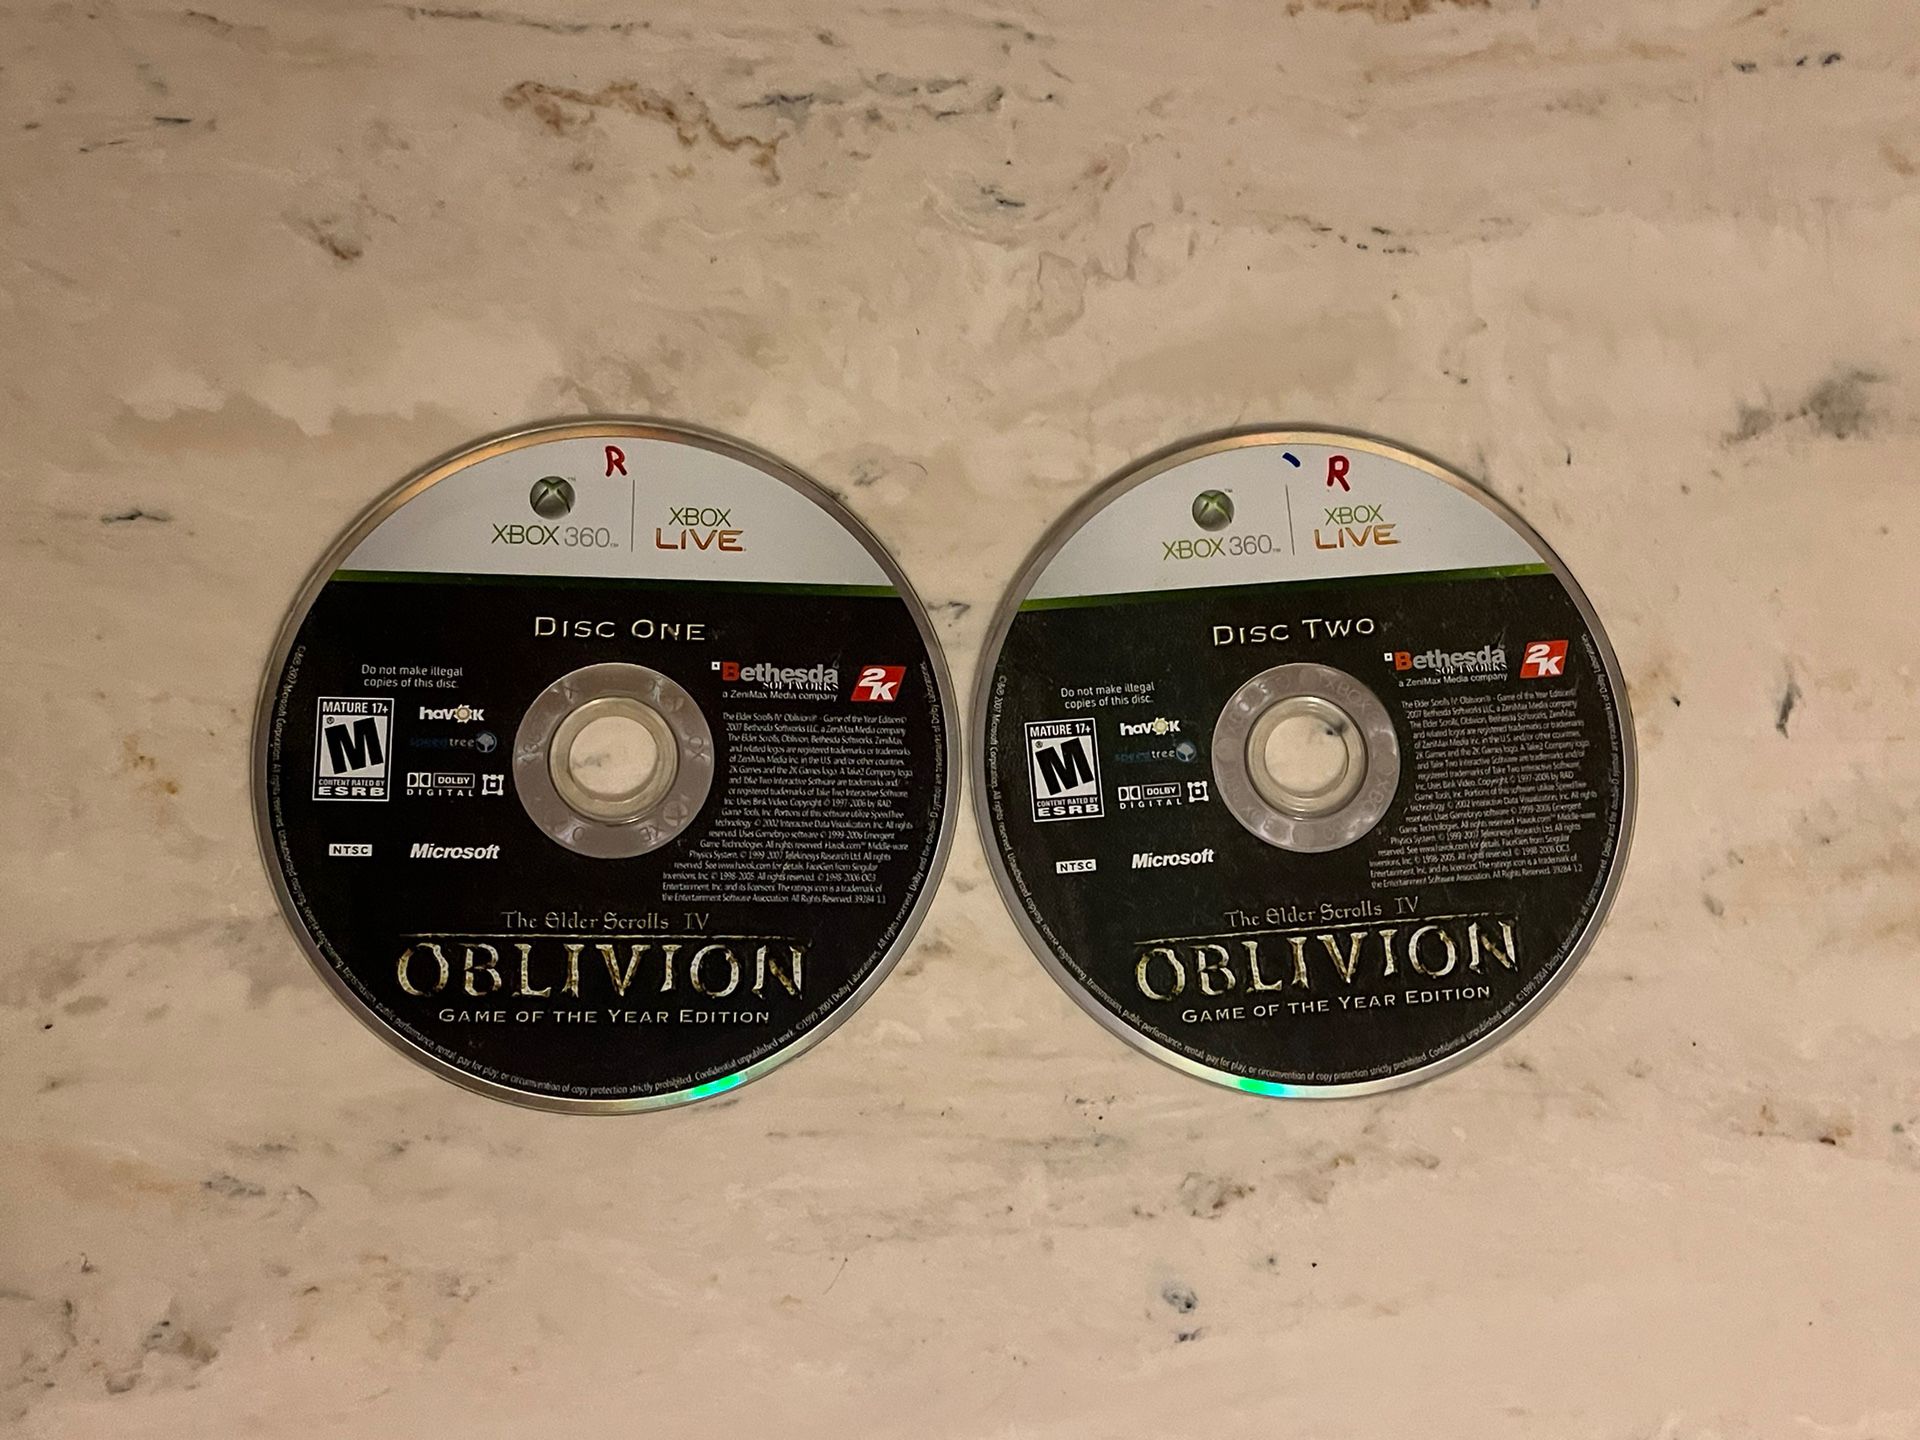 Oblivion Game of the Year Edition